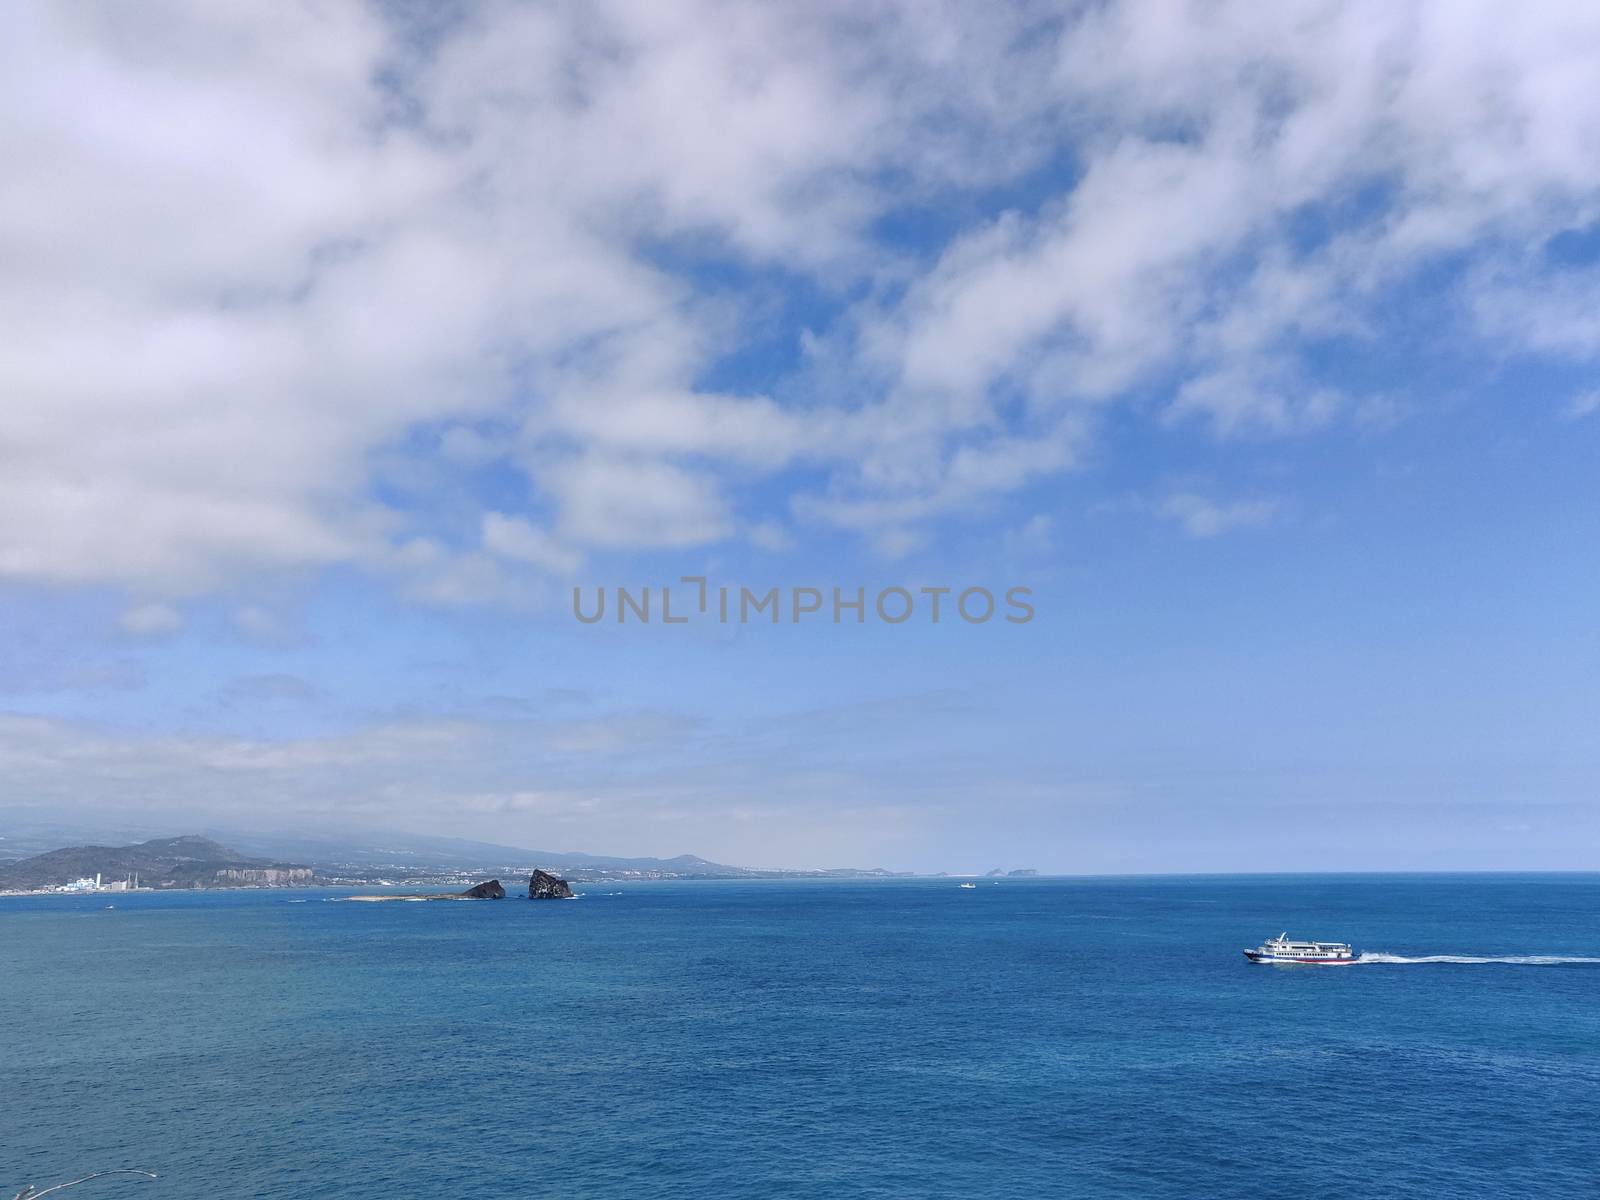 Breathtaking landscape shot of blue sea and cloudy sky by mshivangi92